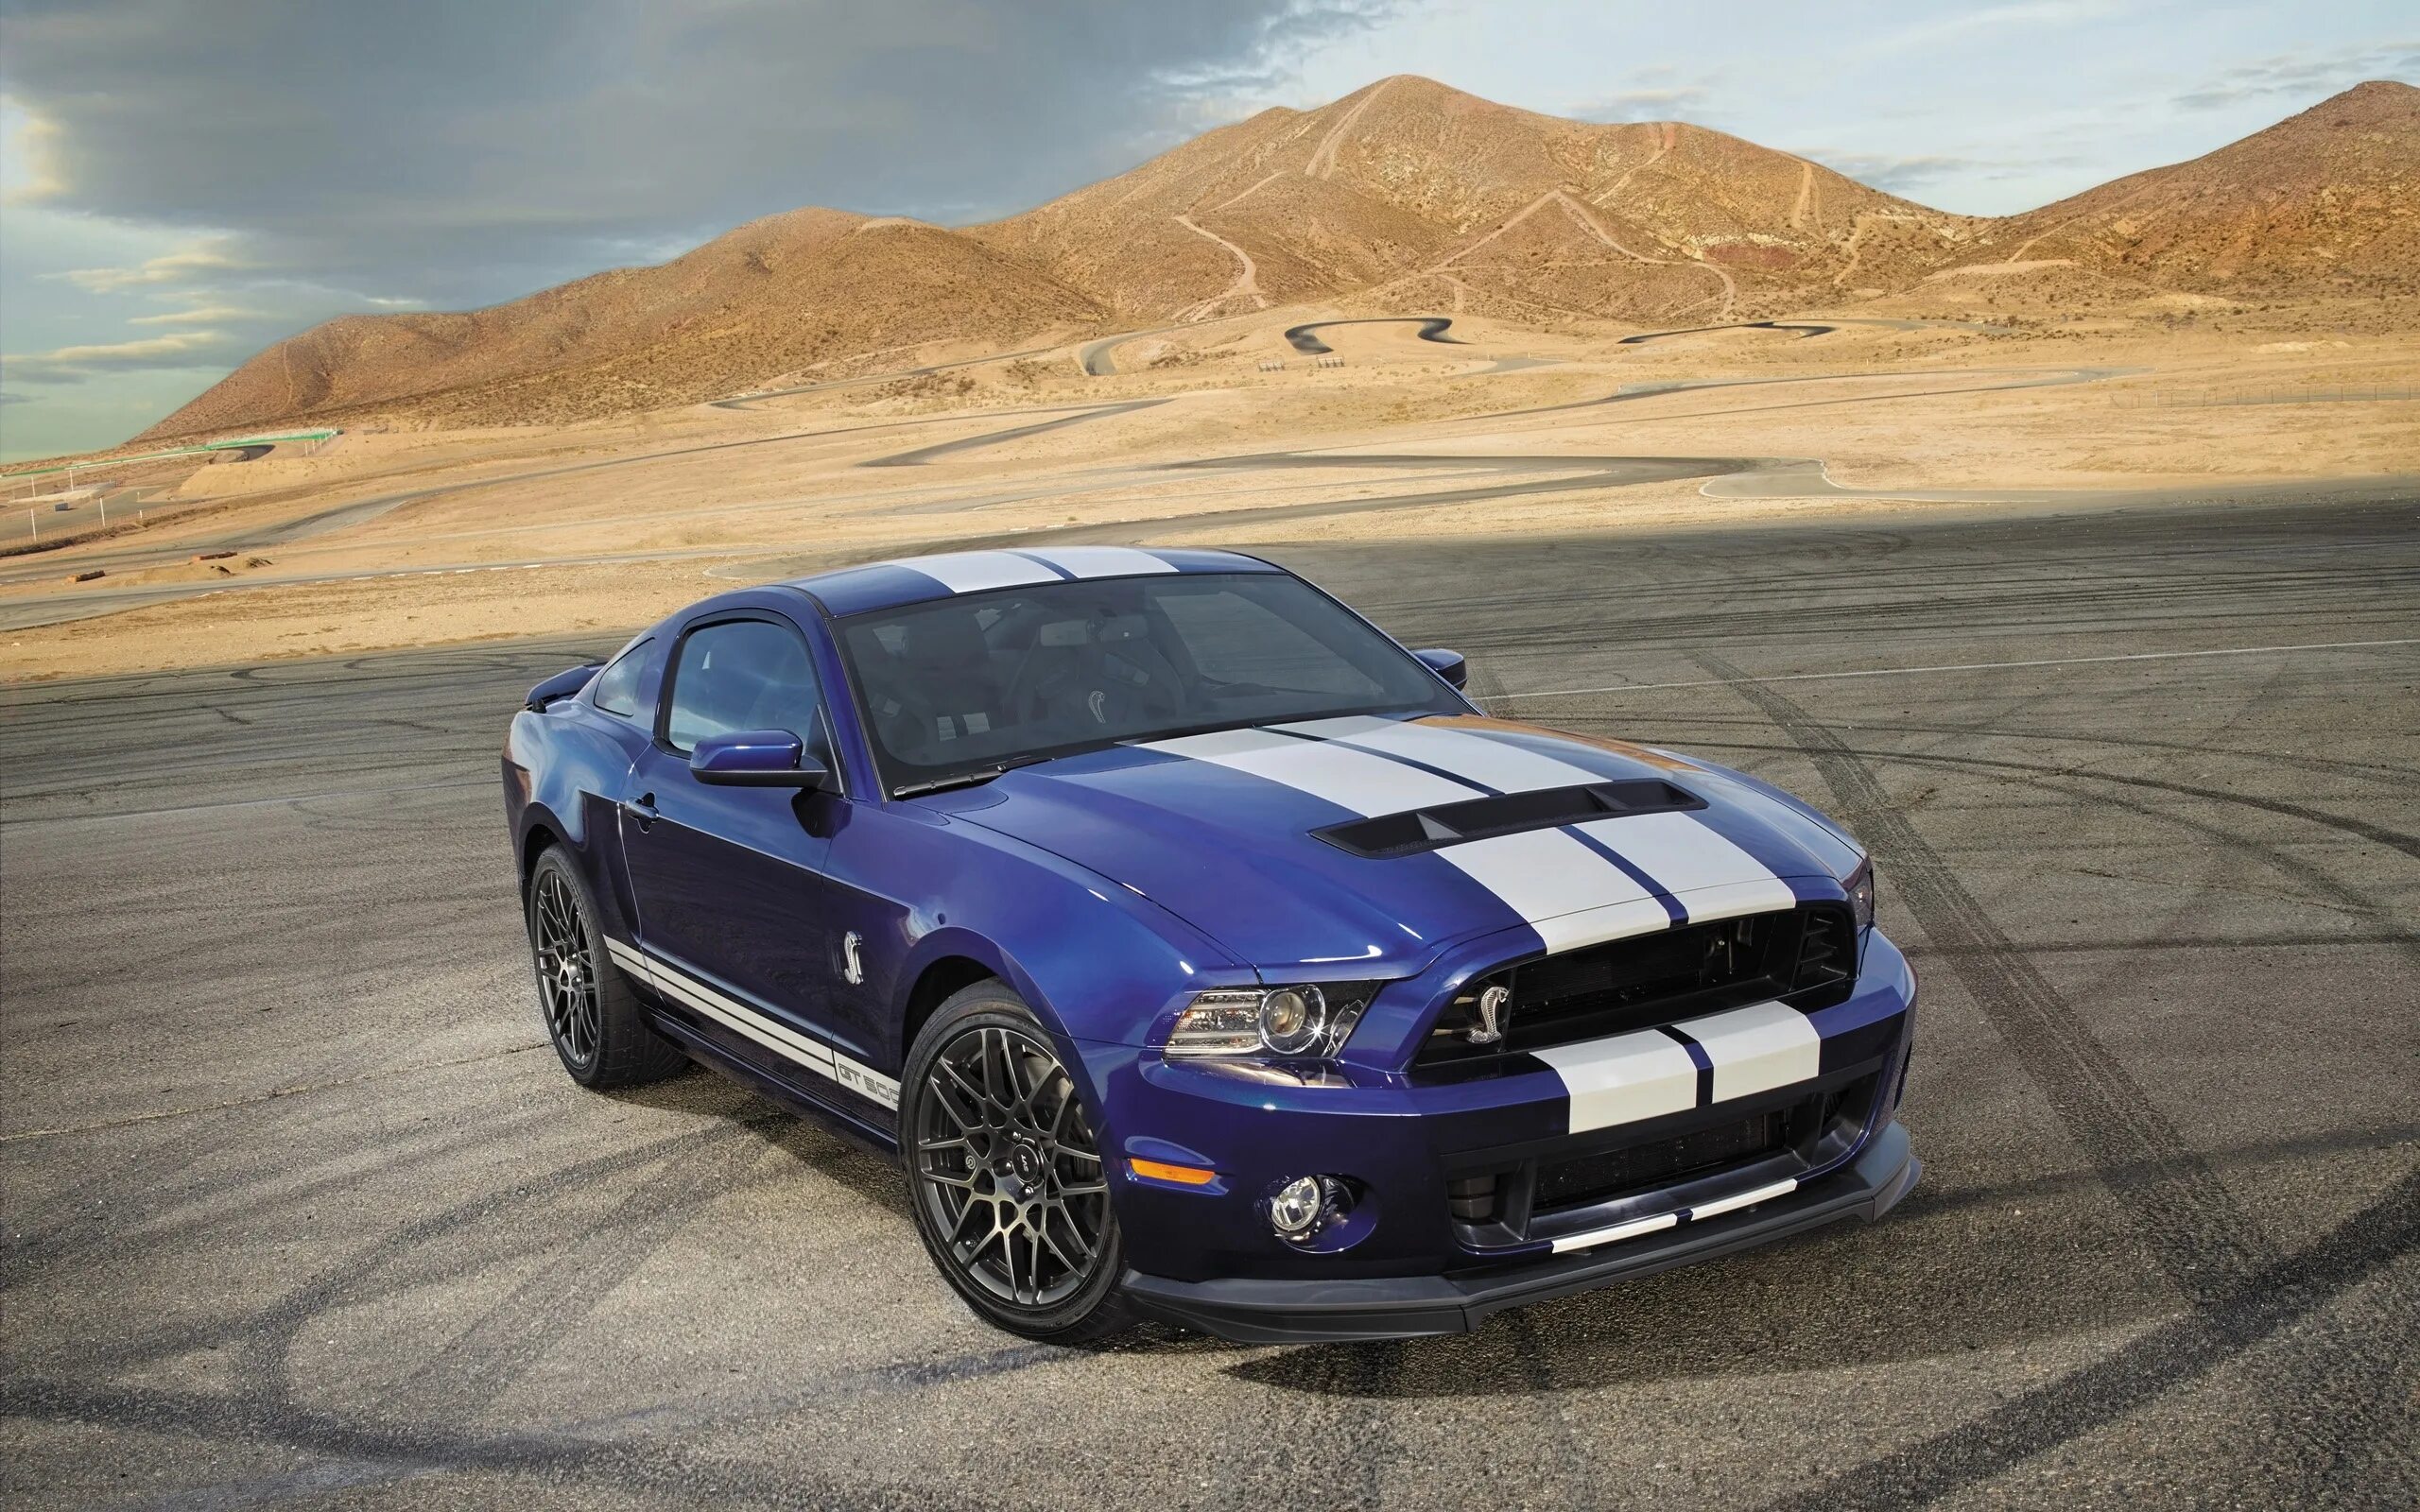 Форд Мустанг gt 500. Форд Шелби ГТ 500. Ford Shelby gt500. Ford Mustang gt. Мустанг на русском языке